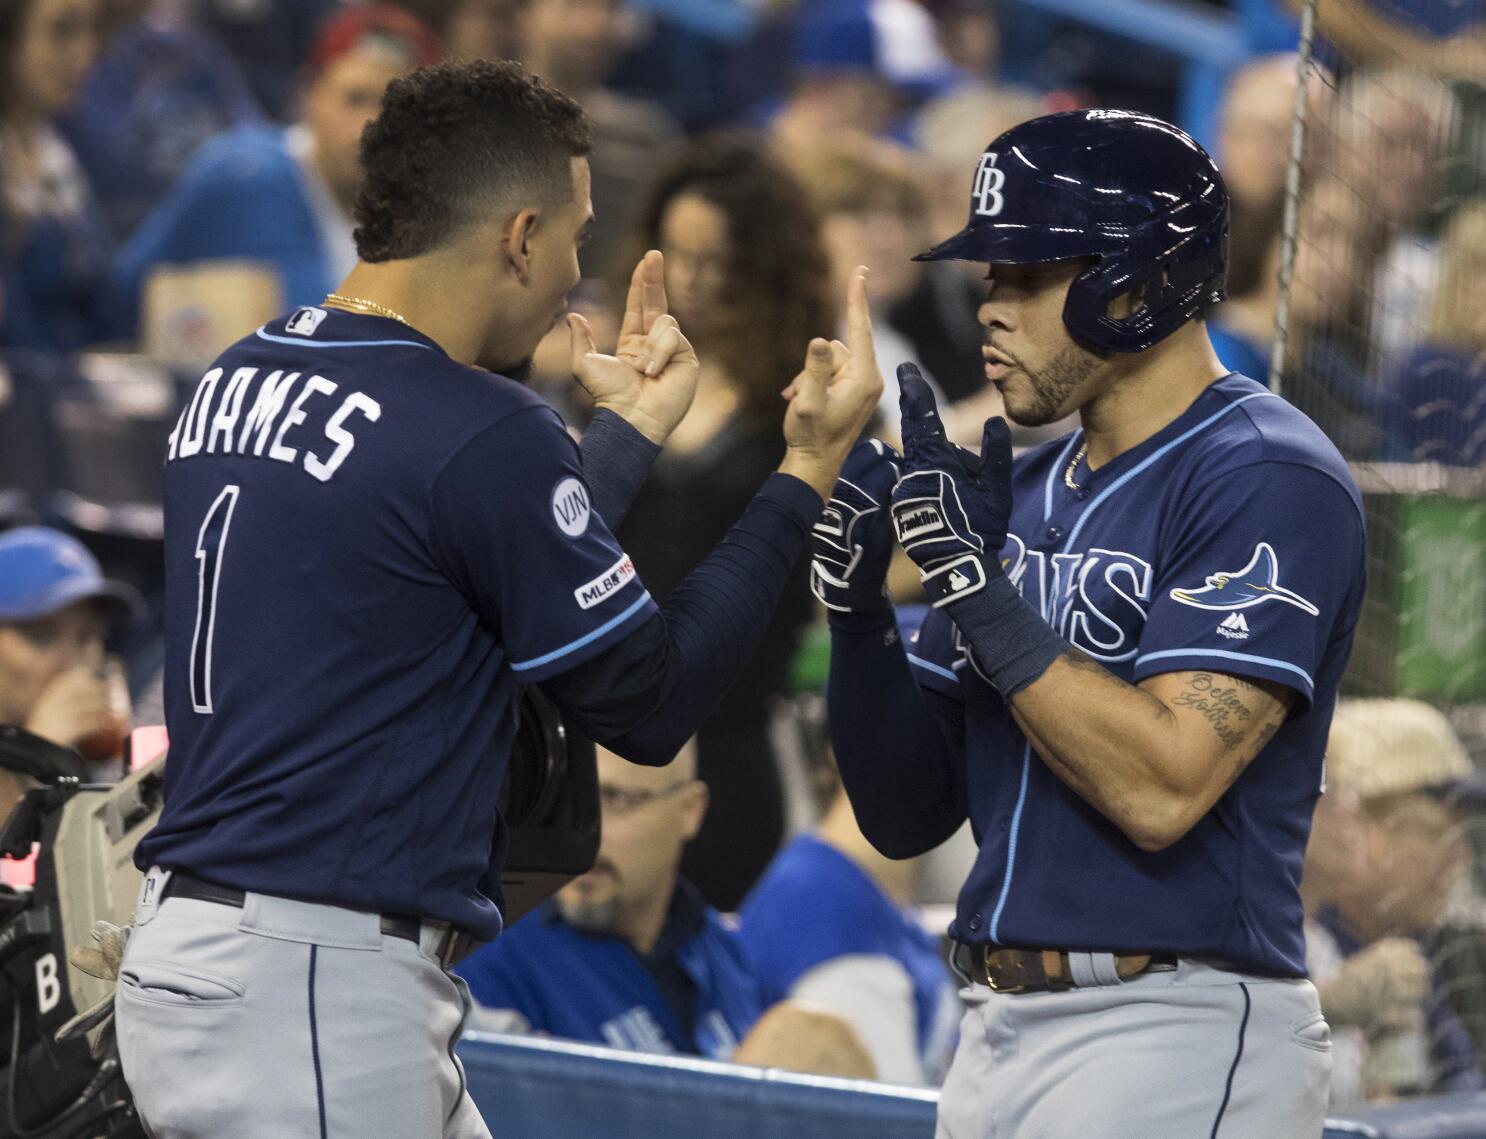 Rays Muscle Up Against Mets as Marcus Stroman Loses Again - The